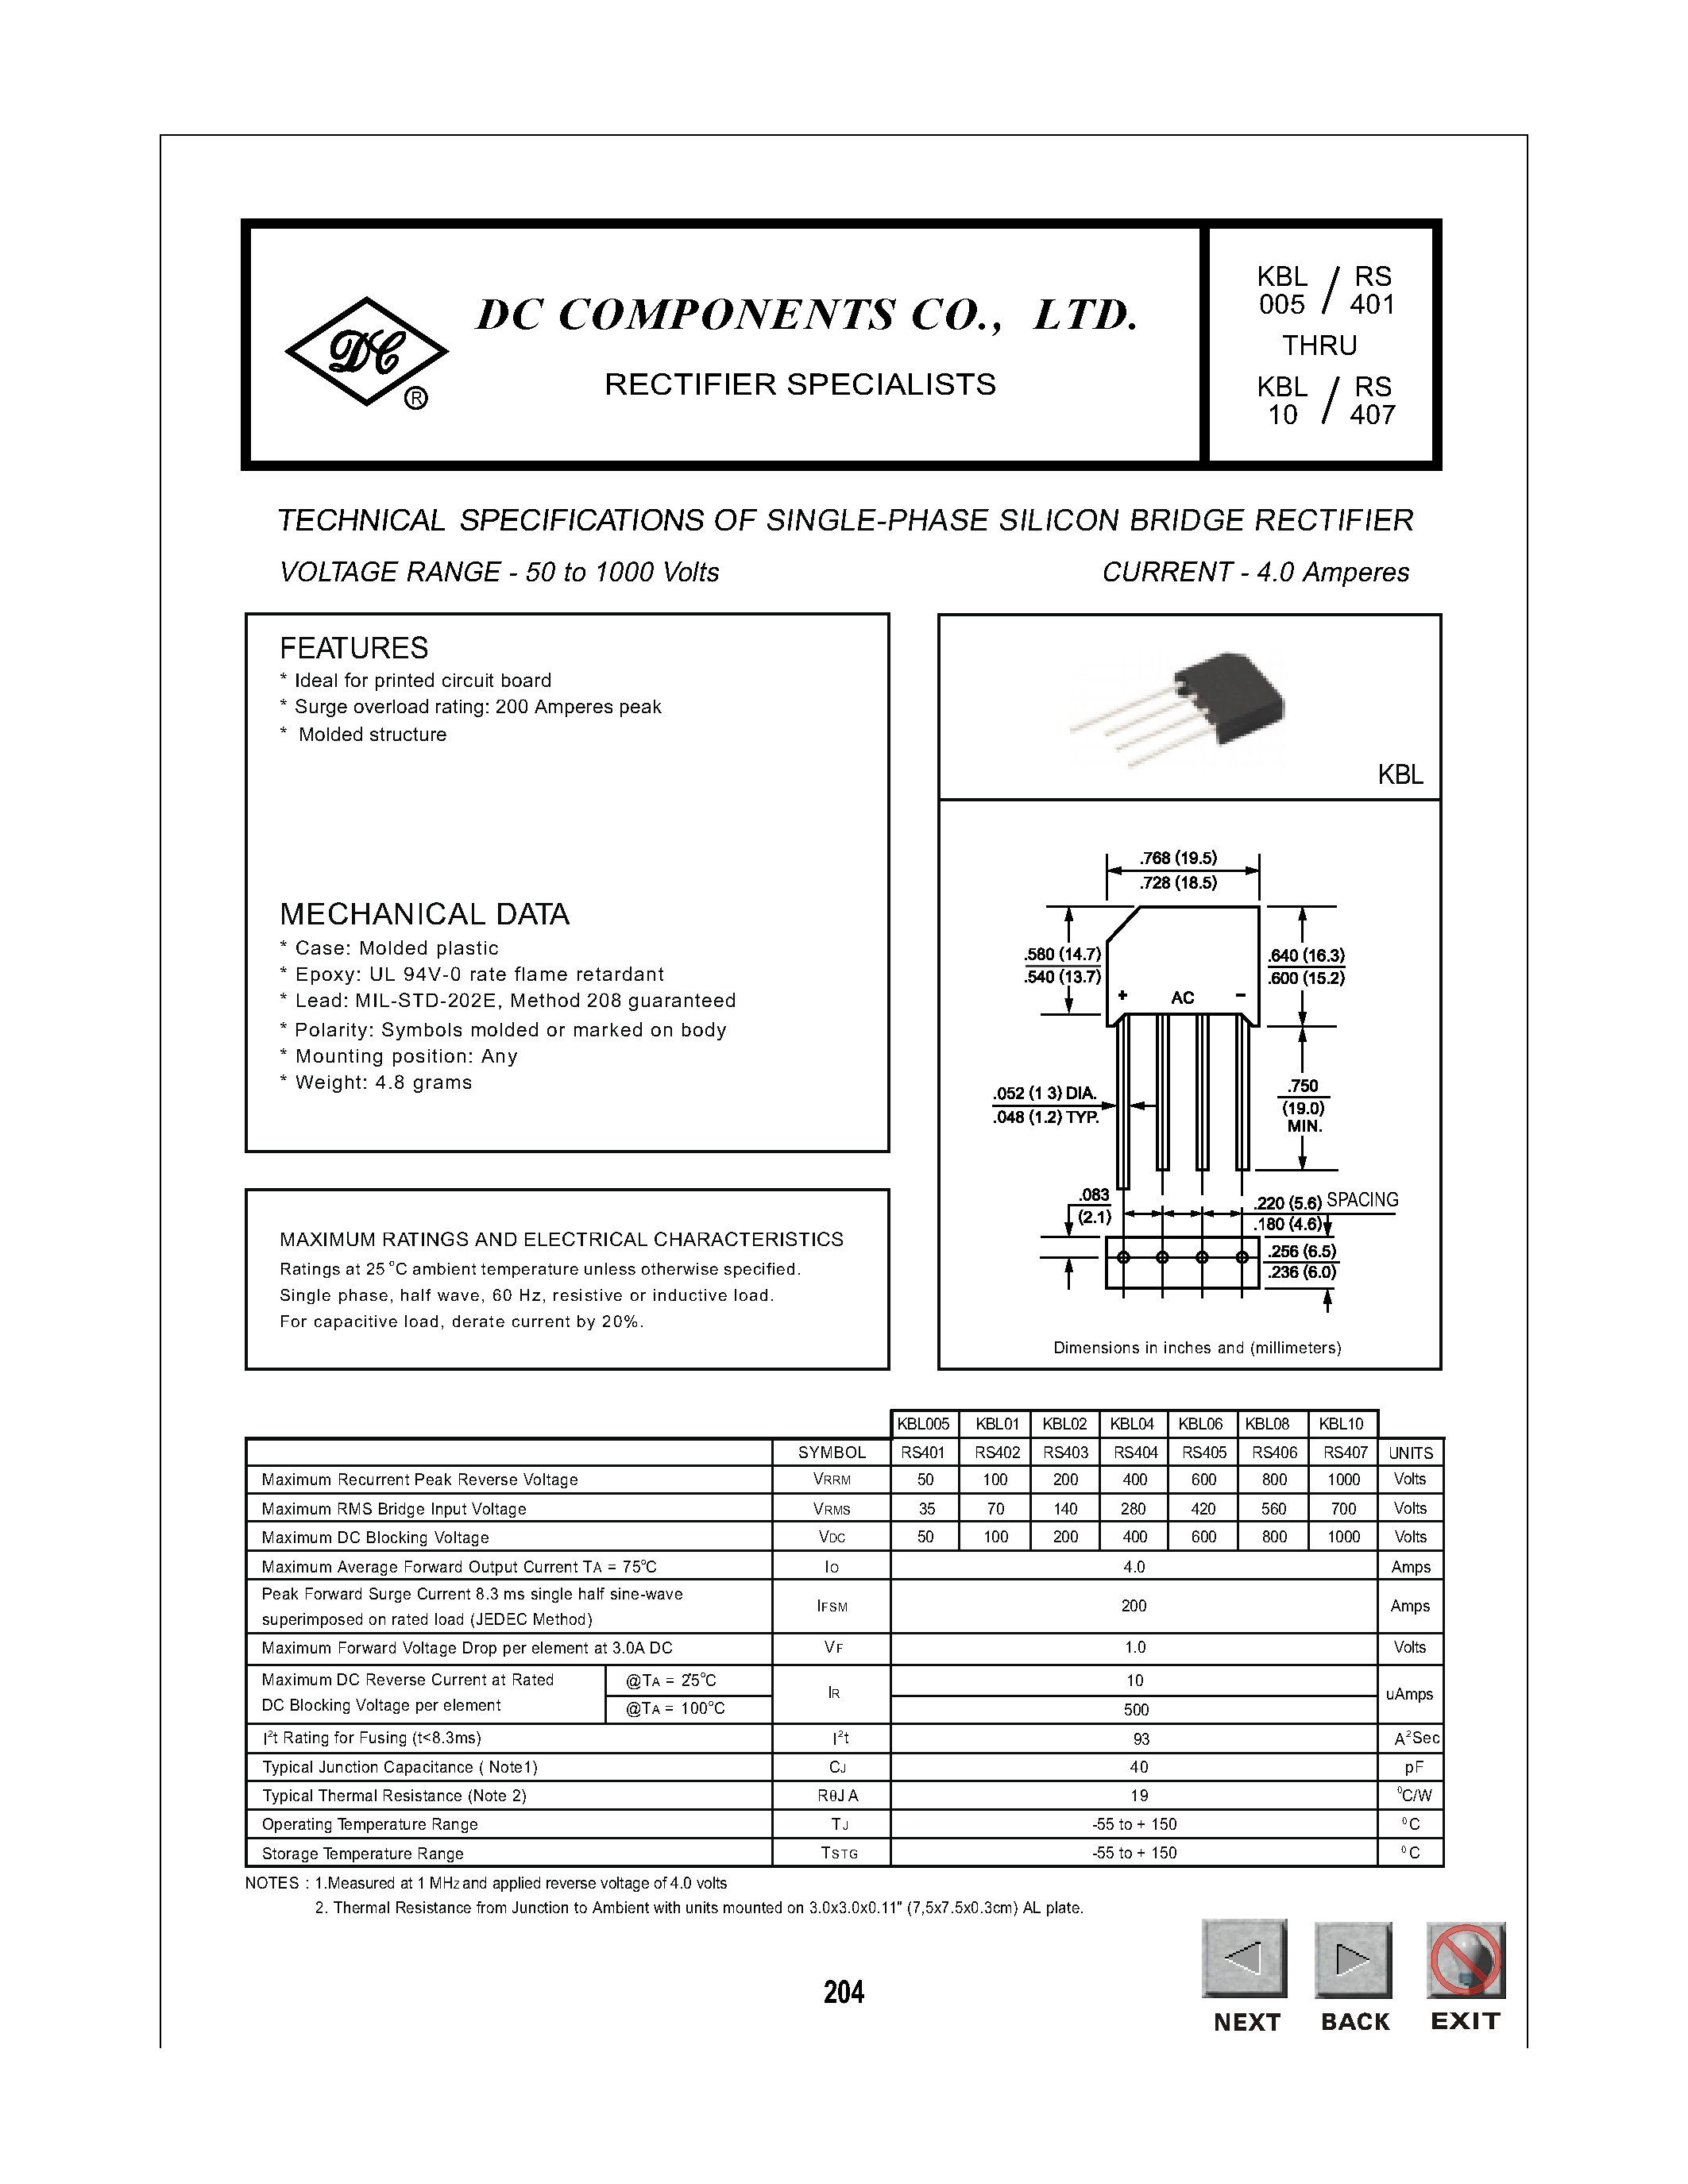 Datasheet KBL005 - TECHNICAL SPECIFICATIONS OF SINGLE-PHASE SILICON BRIDGE RECTIFIER page 1